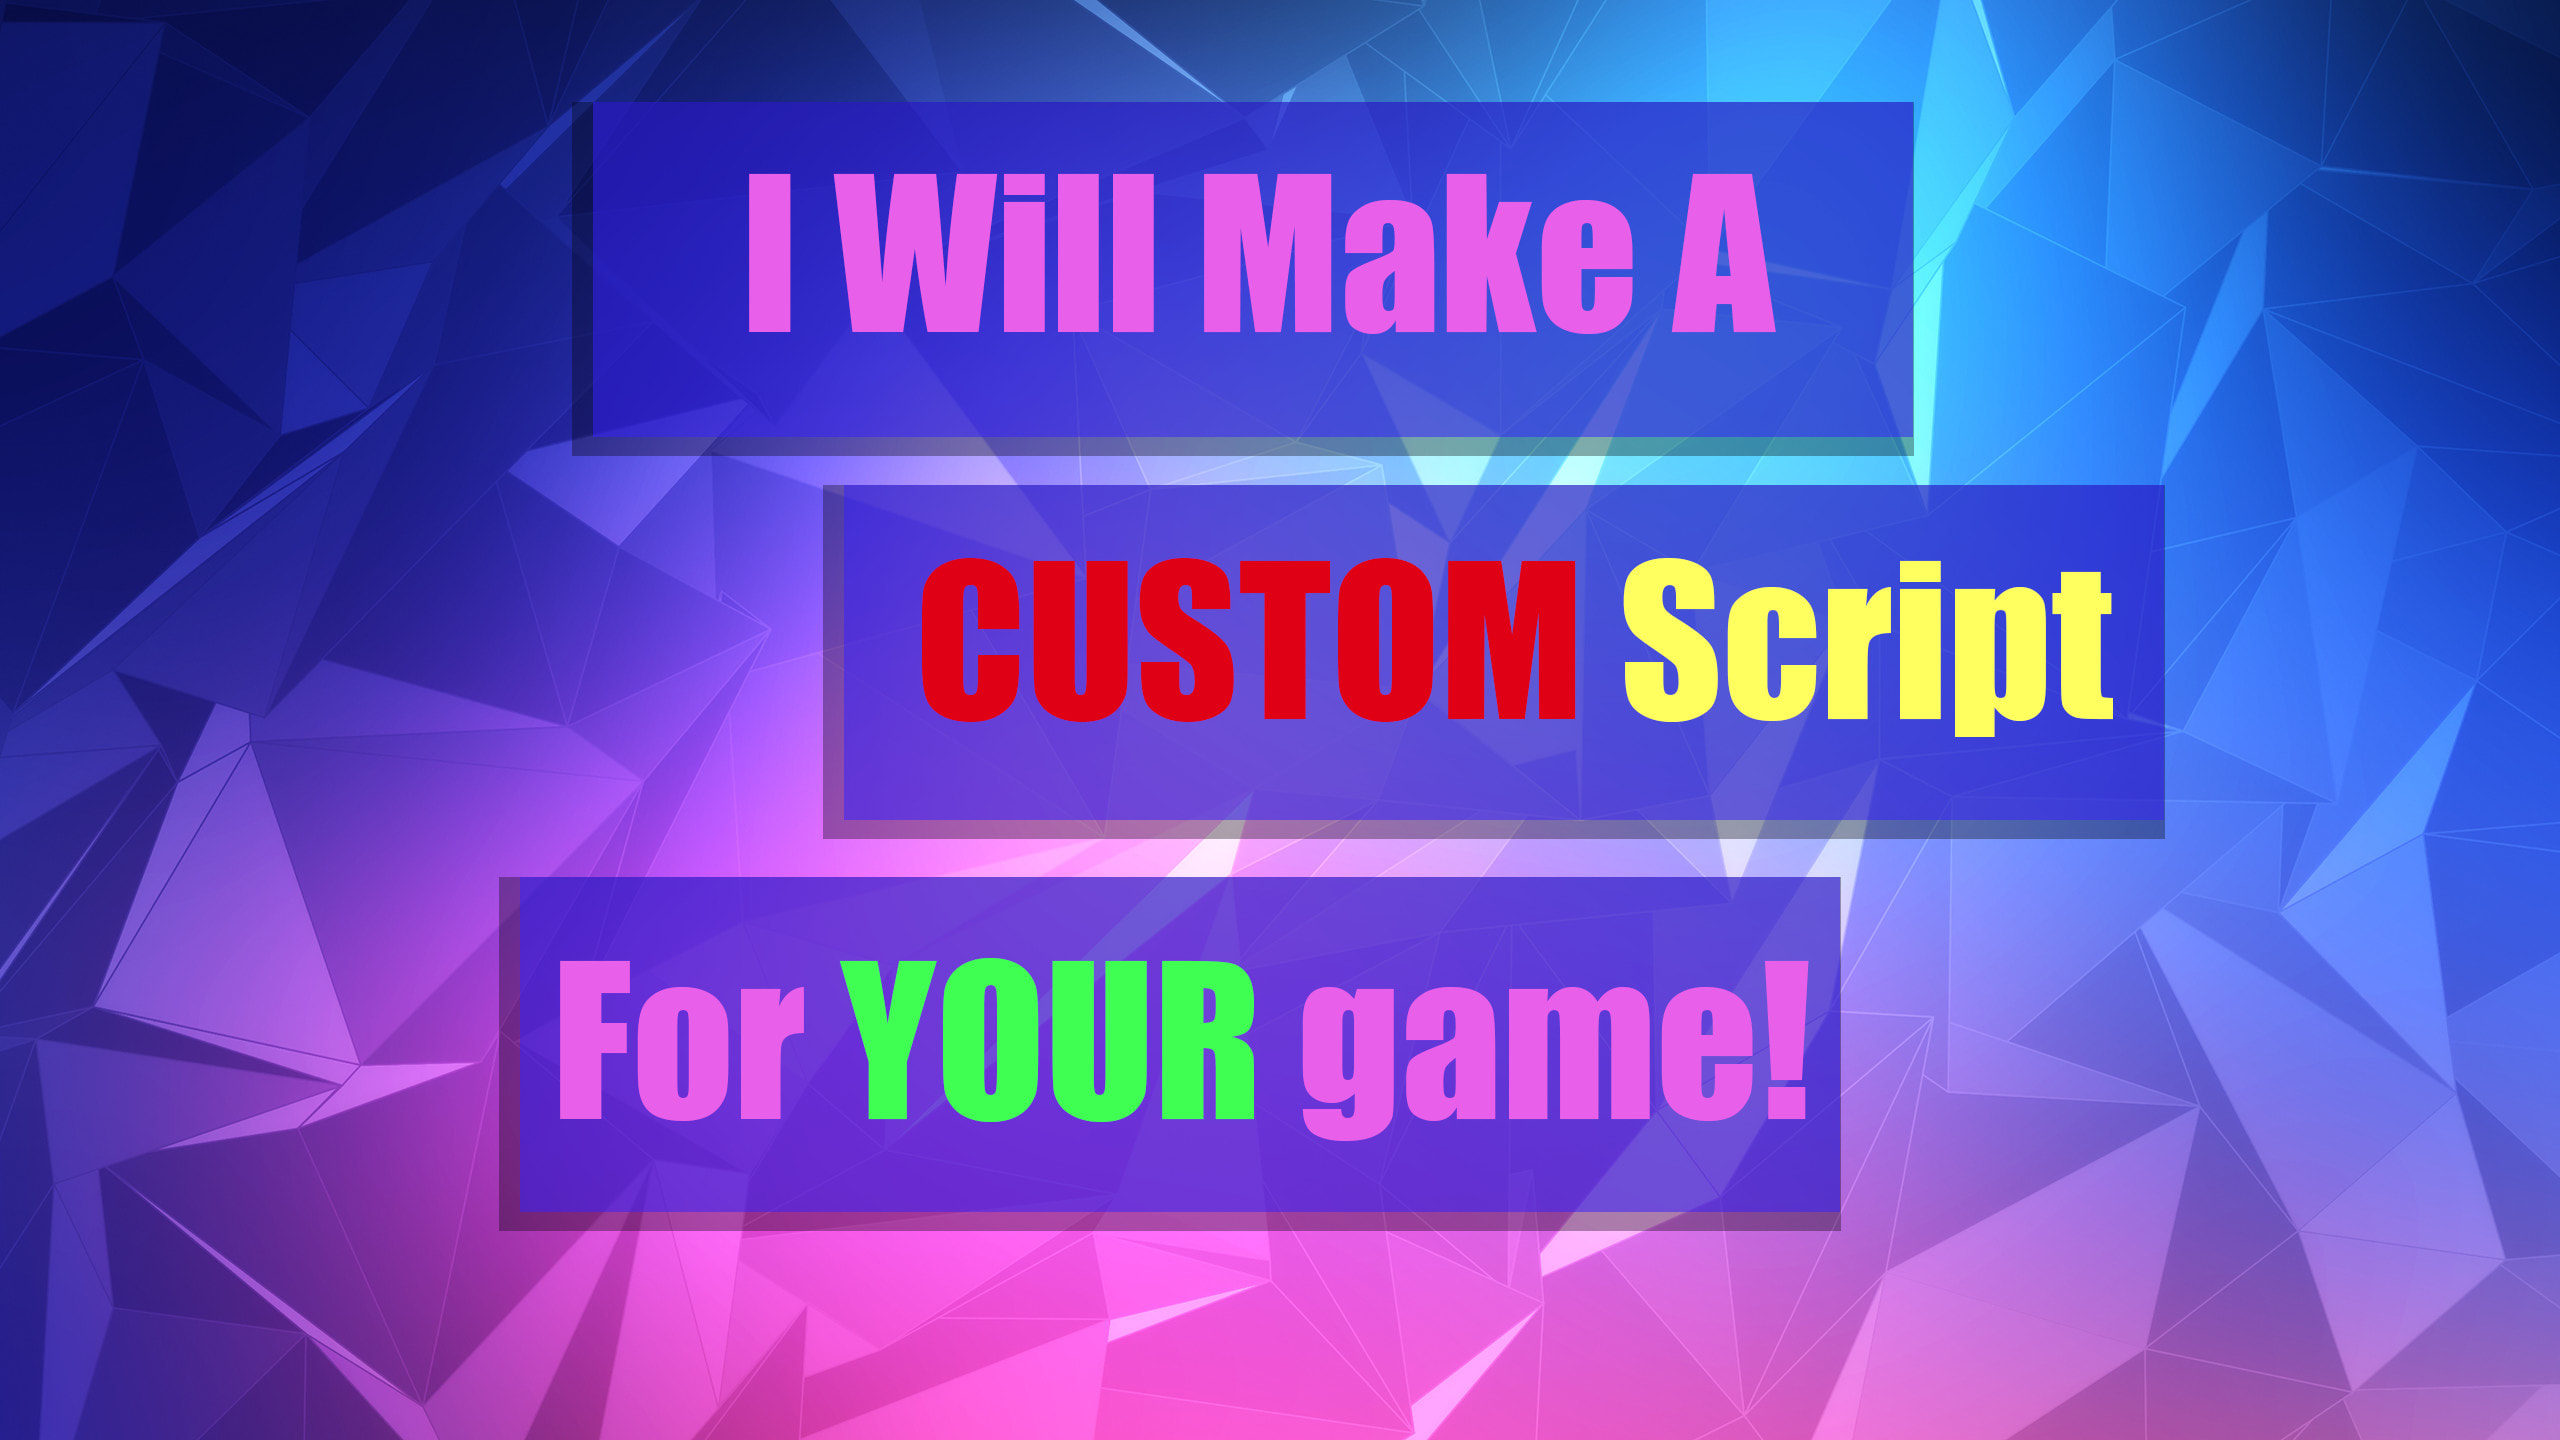 Make A Roblox Script For Your Game By Chunkee512 Fiverr - roblox how to make scripts for games